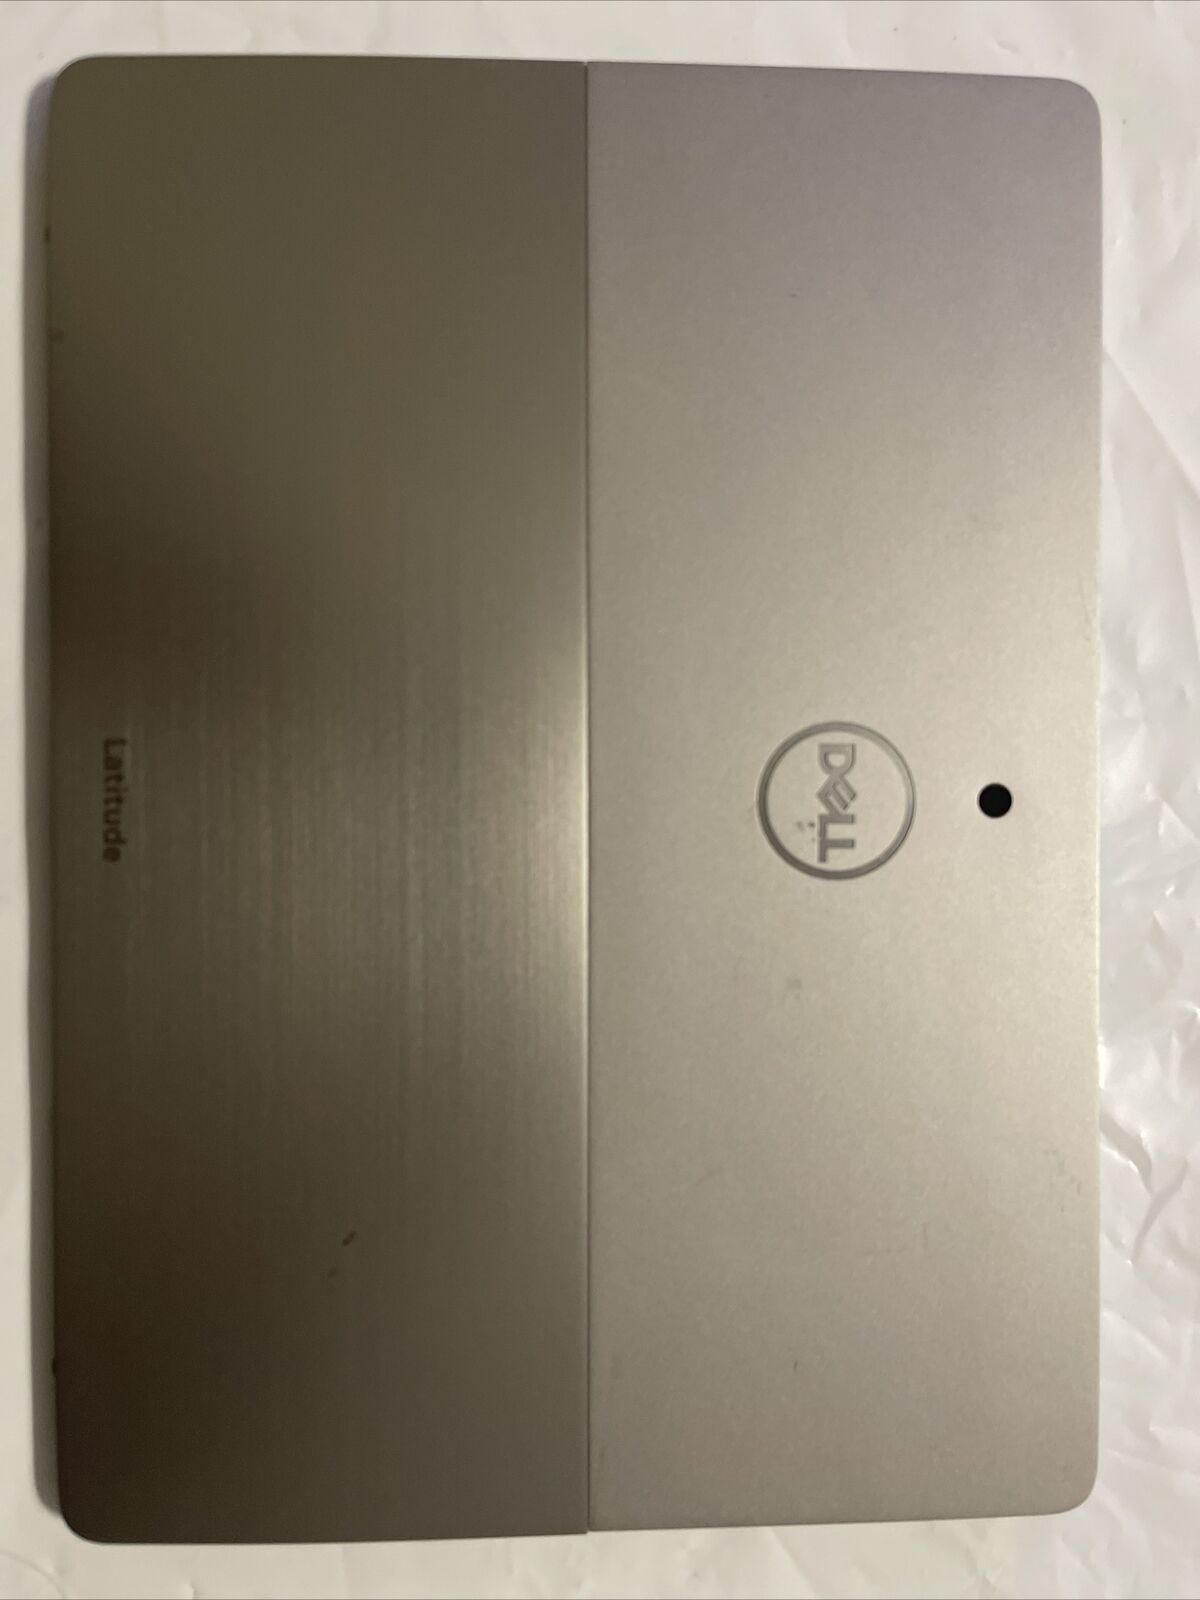 Genuine Dell Latitude 7200 2-in-1 Tablet LCD Back Cover W/ Speakers  VCDRT B7 H5